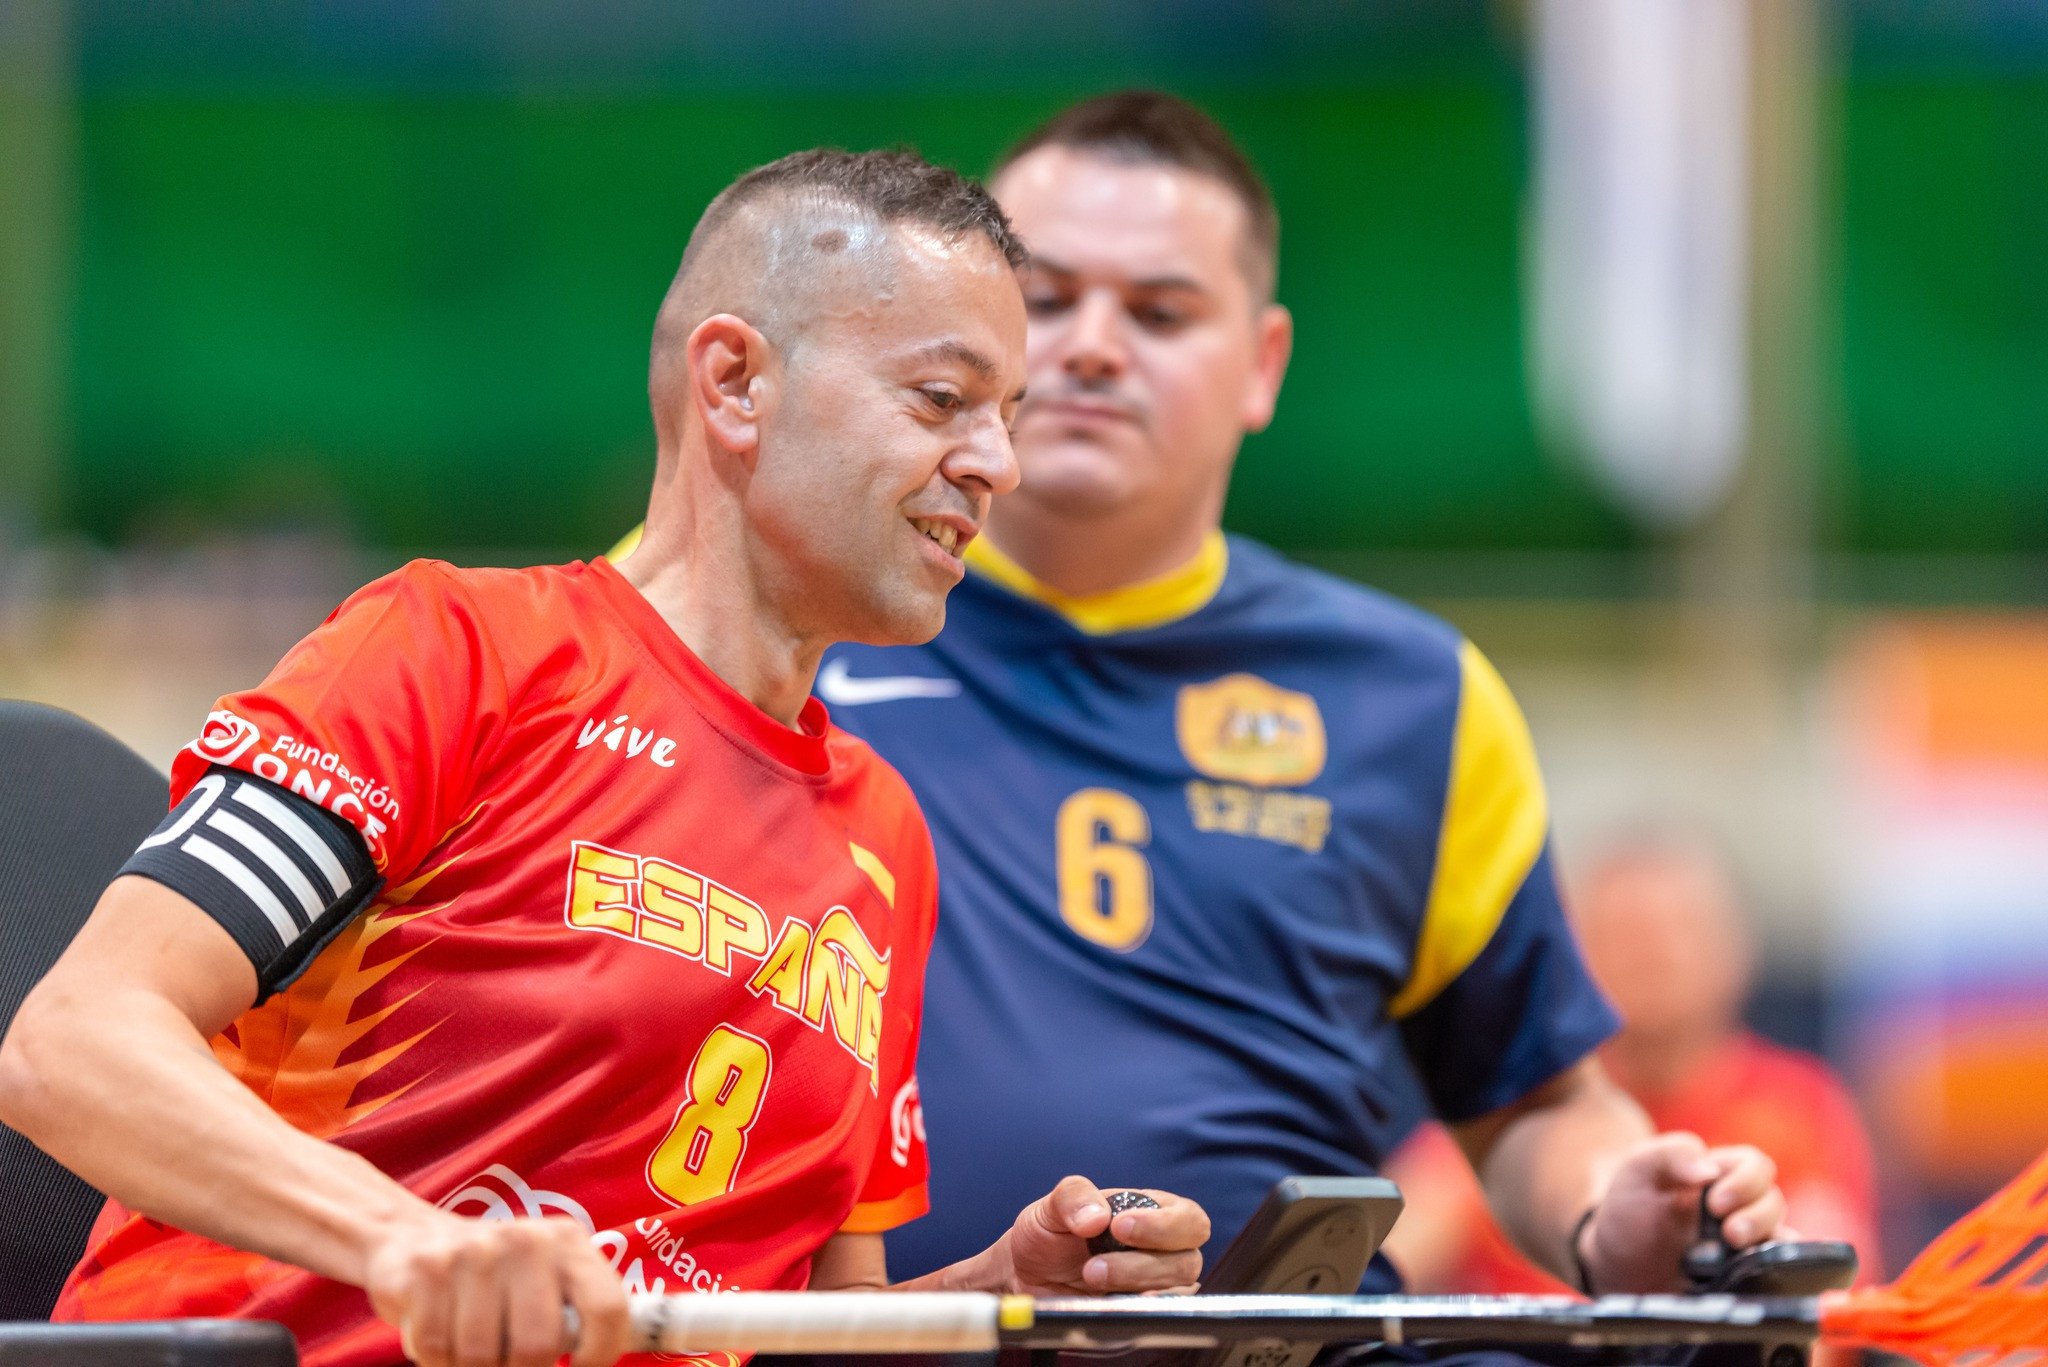 Spain started their campaign with a convincing 8-1 win over Australia ©IWAS Powerchair Hockey World Championship 2022 Sursee